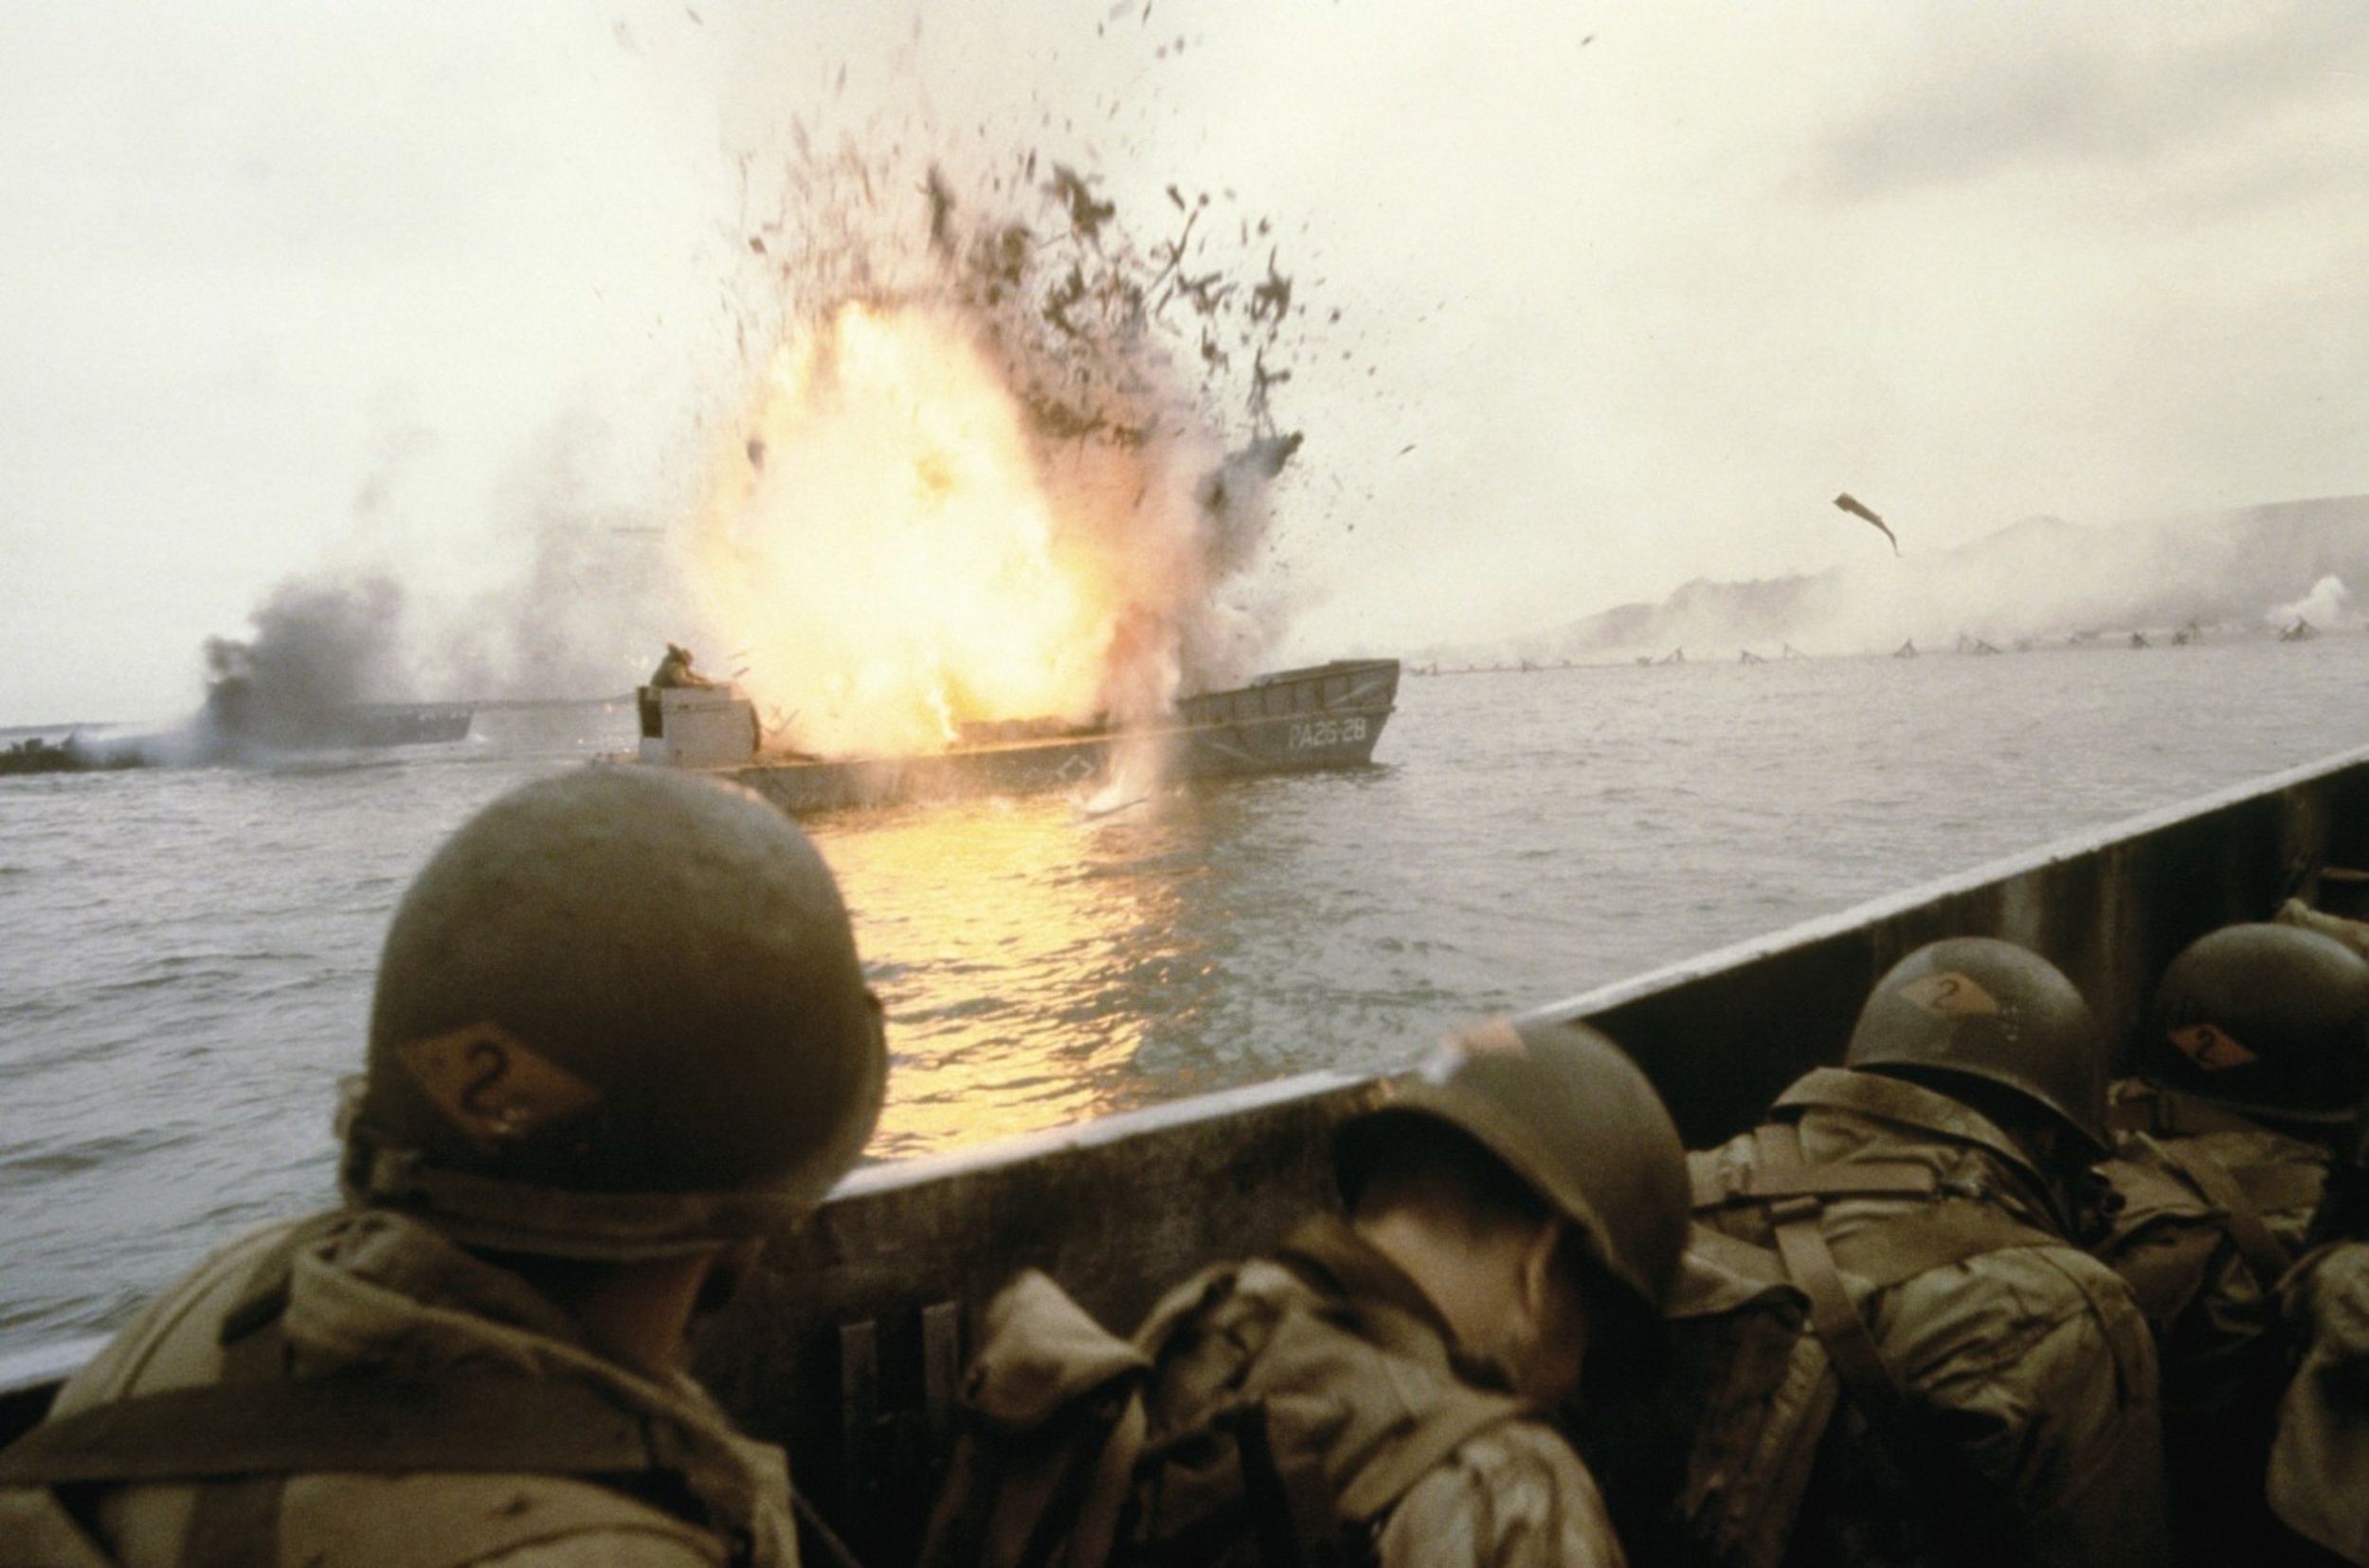 <p>Critics loved <em>Saving Private Ryan</em>, and the movie was lauded for its veracity. However, the realism and intensity did not sit well with everybody. Many World War II veterans said it was the most realistic depiction of the war they had ever seen, but many veterans also had to leave theaters during the D-Day scene due to PTSD reactions.</p><p><a href='https://www.msn.com/en-us/community/channel/vid-cj9pqbr0vn9in2b6ddcd8sfgpfq6x6utp44fssrv6mc2gtybw0us'>Follow us on MSN to see more of our exclusive entertainment content.</a></p>